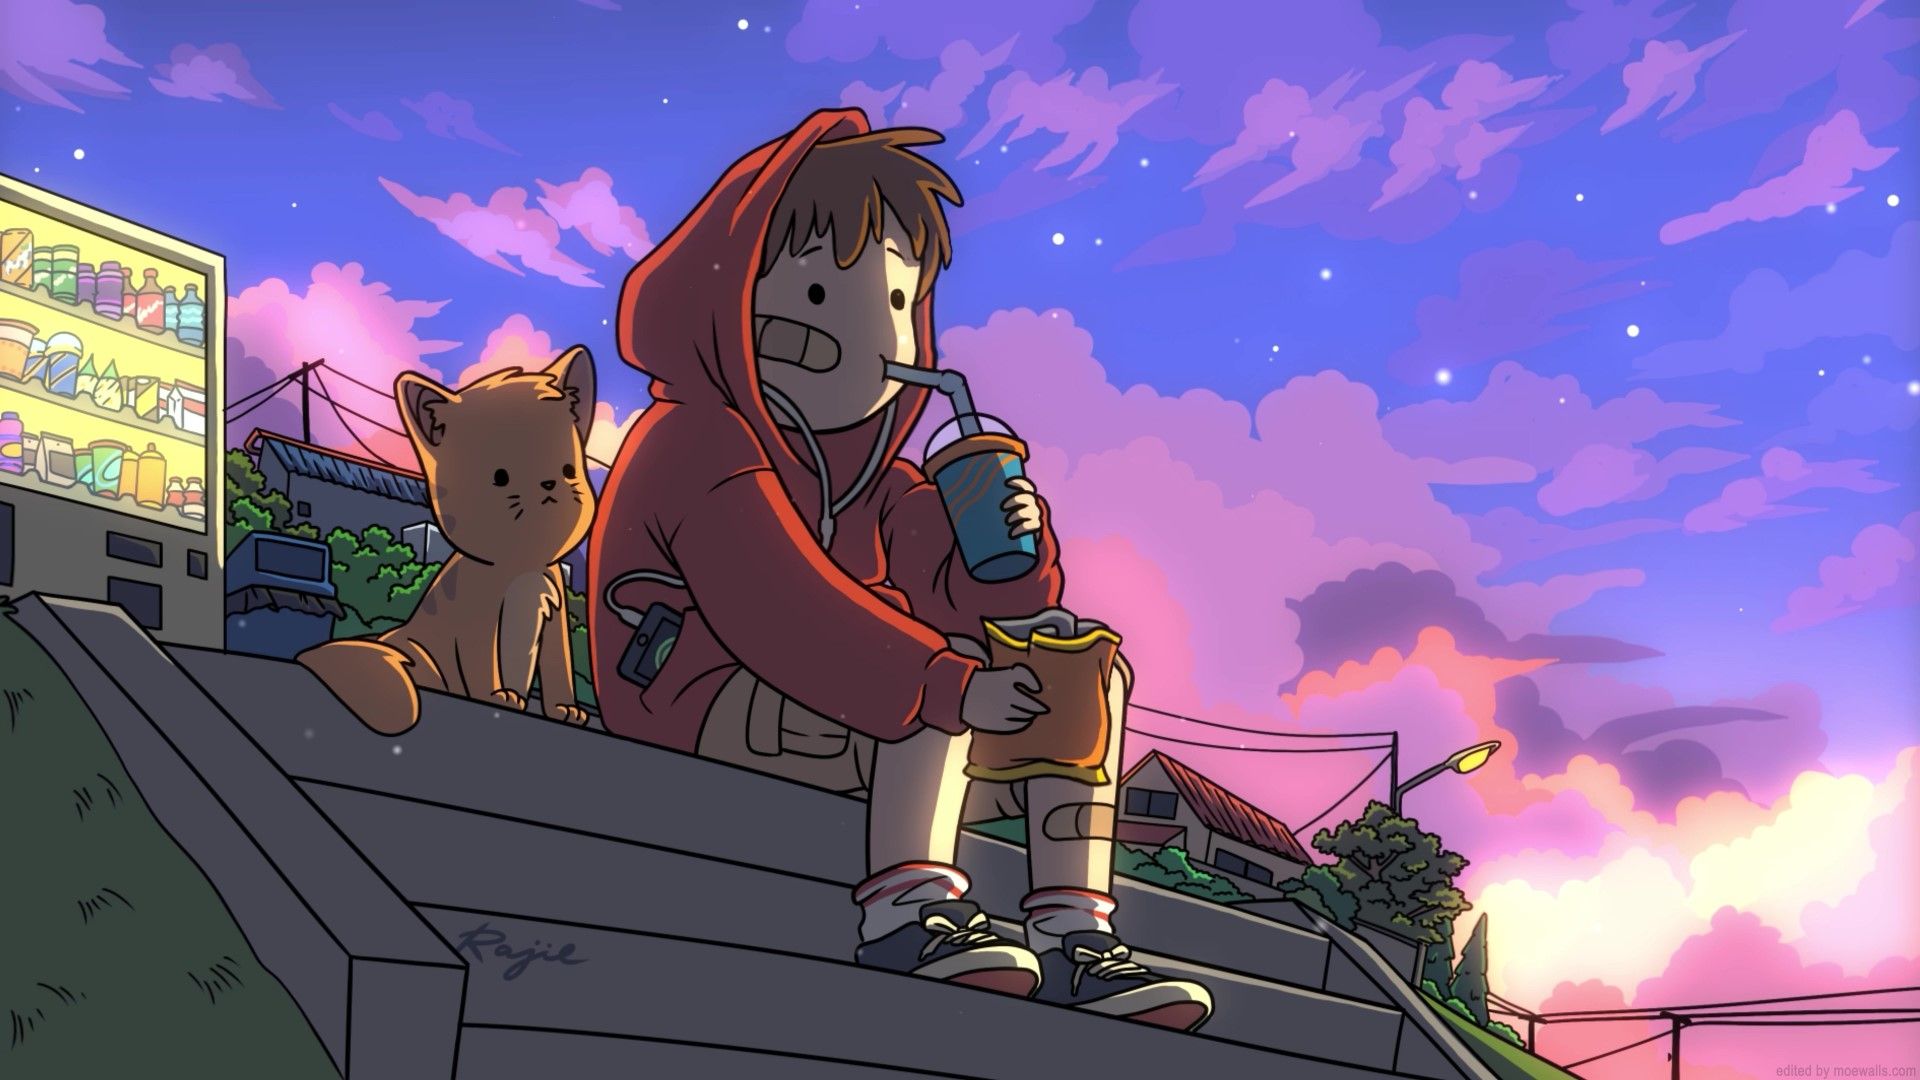 A girl and her cat sit on a rooftop, watching the sunset. - 1920x1080, Windows 10